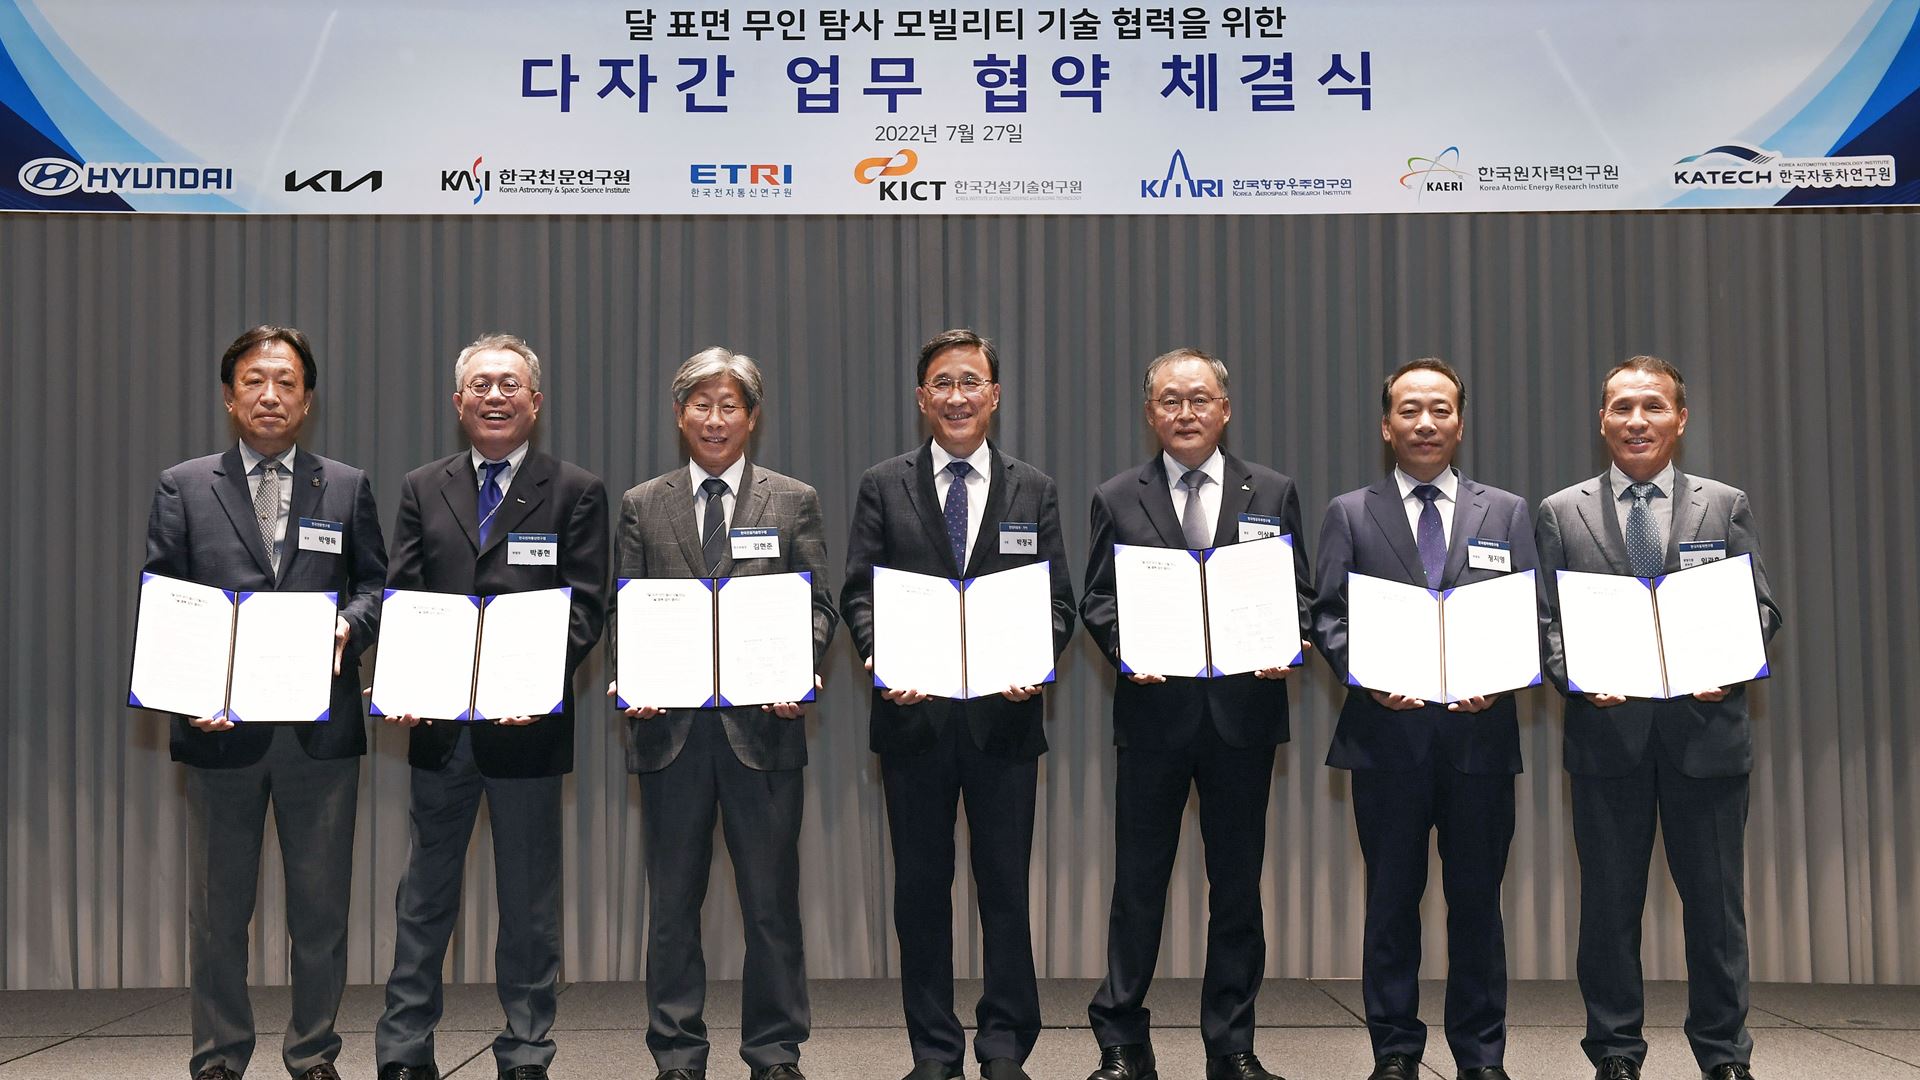 Hyundai Motor and Kia to Develop Lunar Surface Exploration Mobility through Joint Multilateral Research Agreement